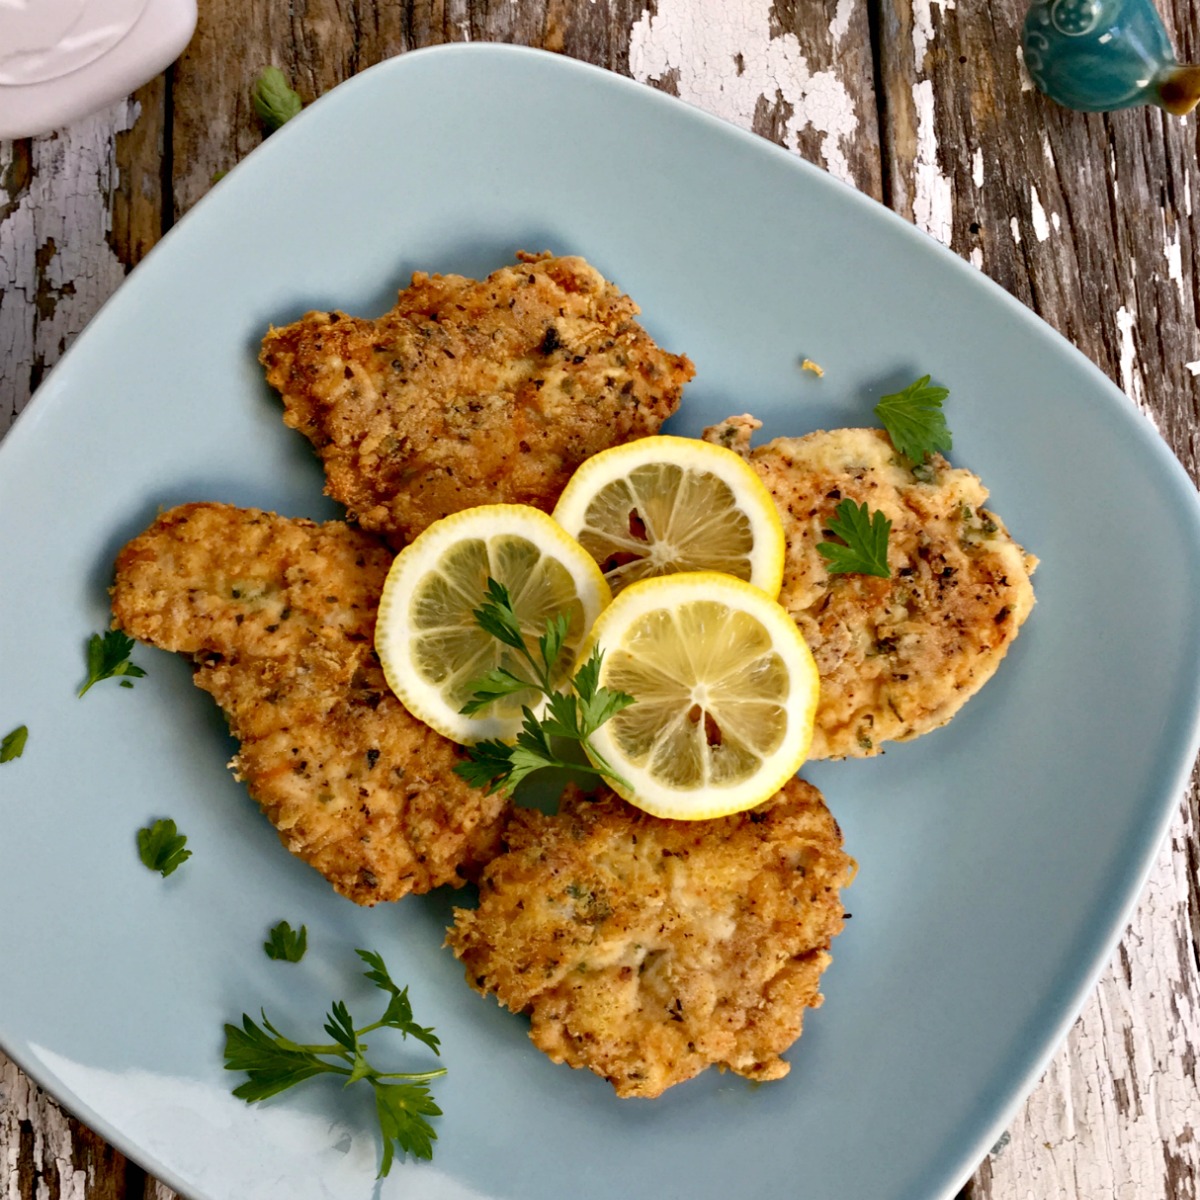 How to make Italian Chicken Cutlets, Gluten Free from Spinach Tiger